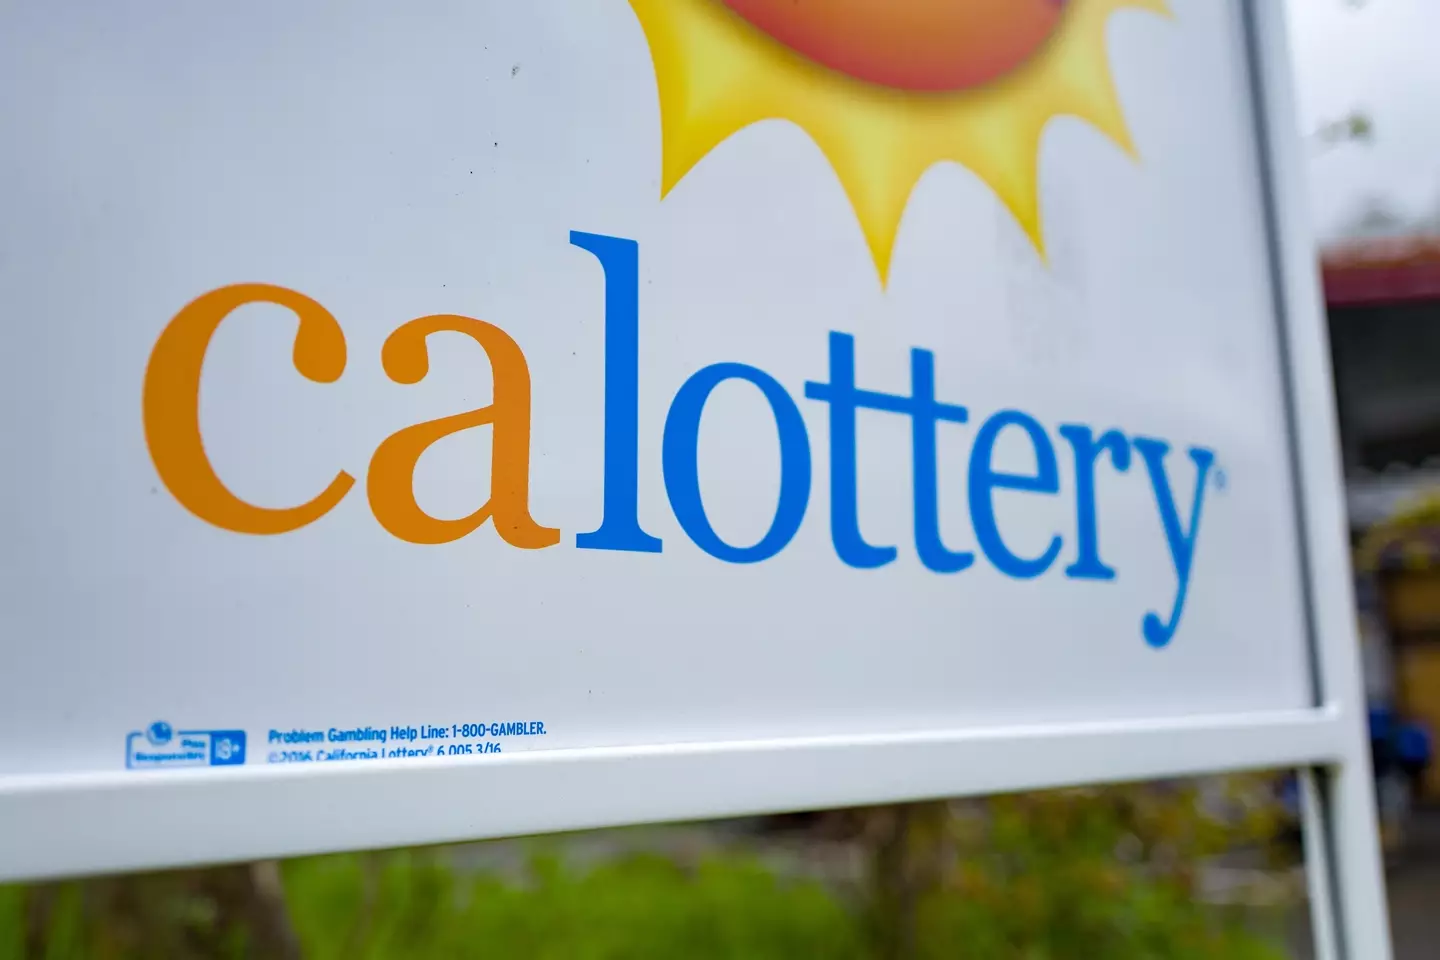 The supermarket also received a $50,000 bonus from the California Lottery.